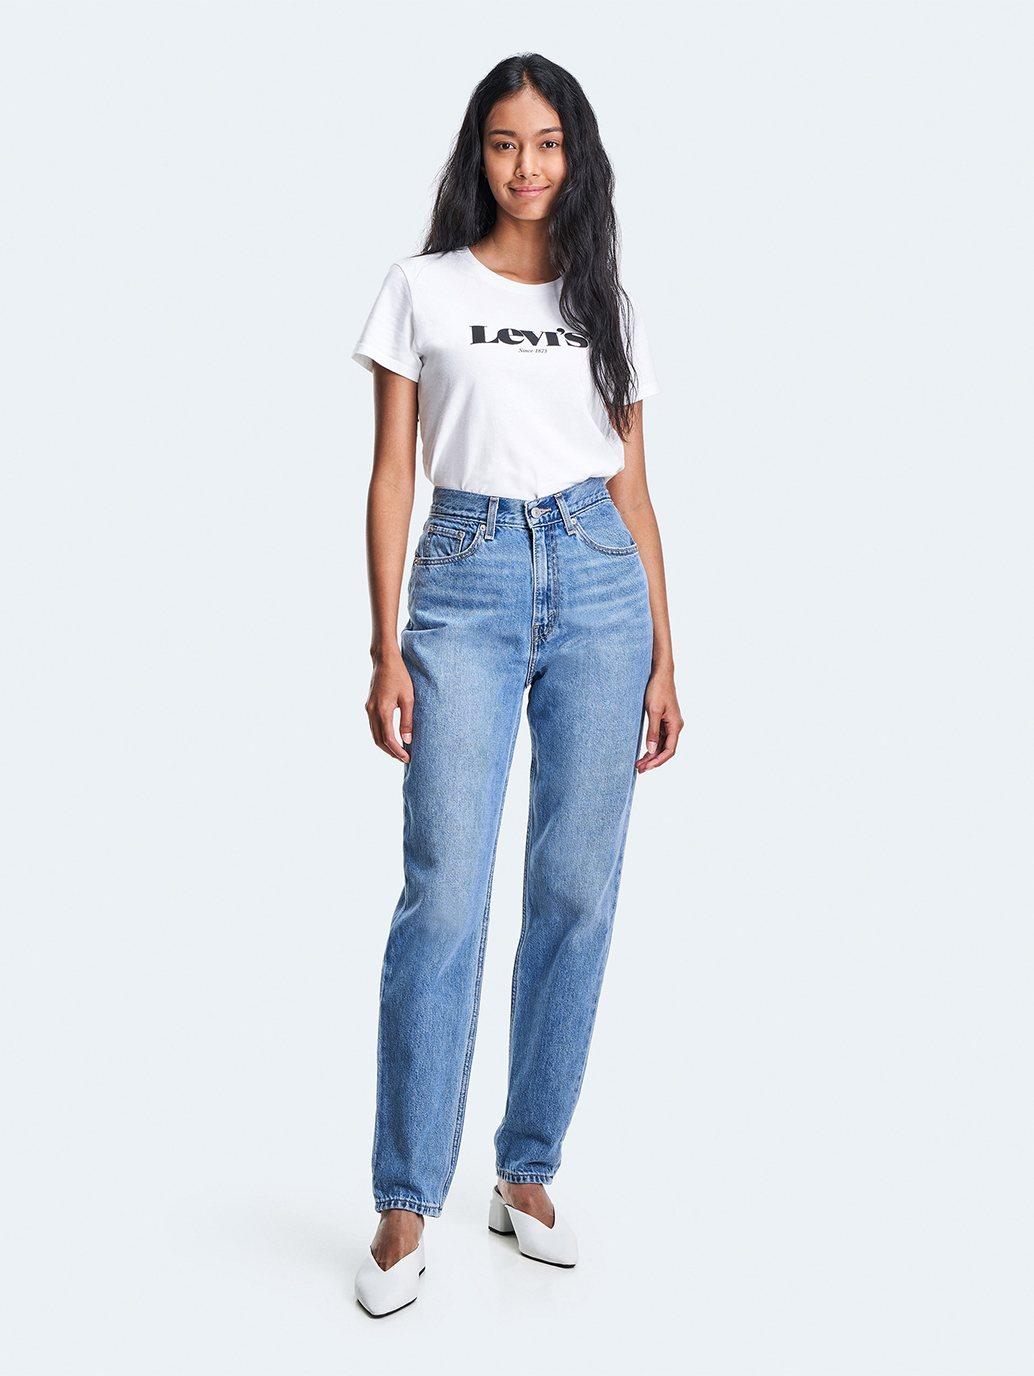 levis singapore womens 80s mom jeans A35060002 10 Model Front